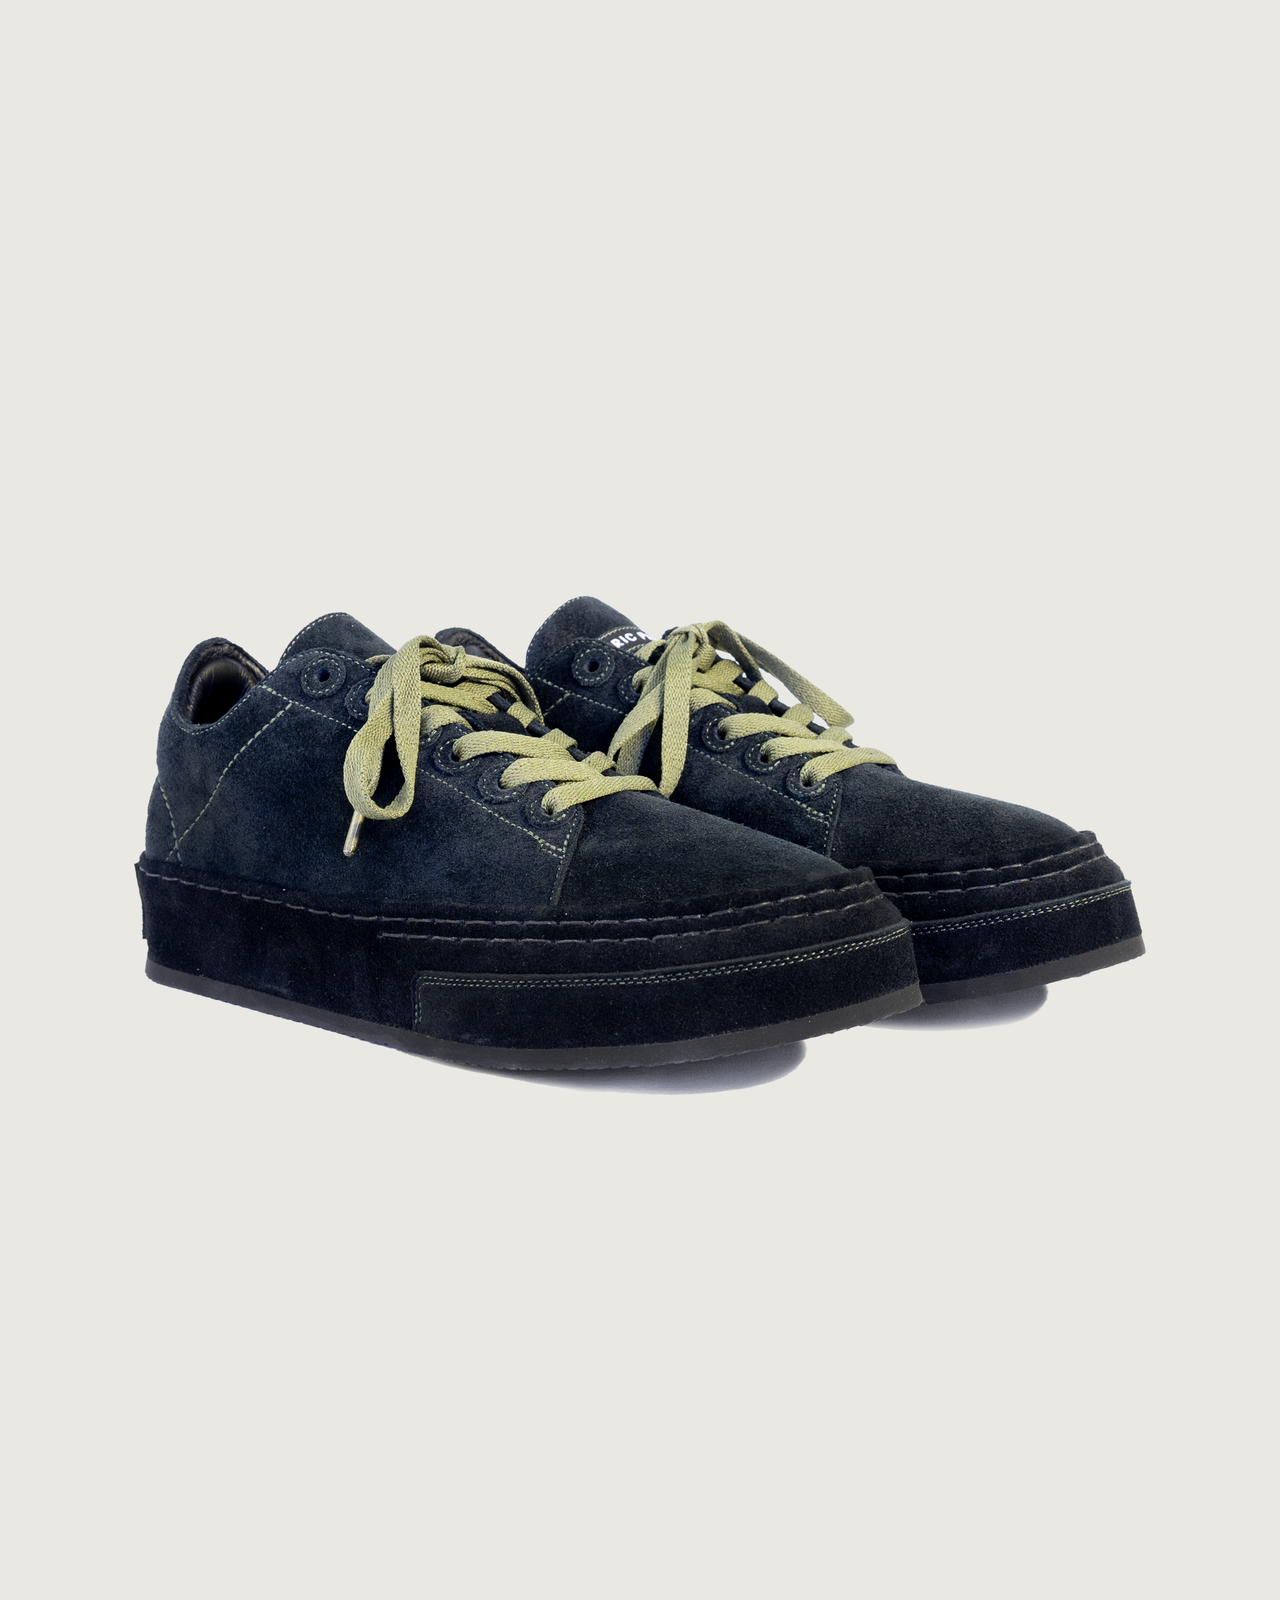 lace to toe full suede black/olive